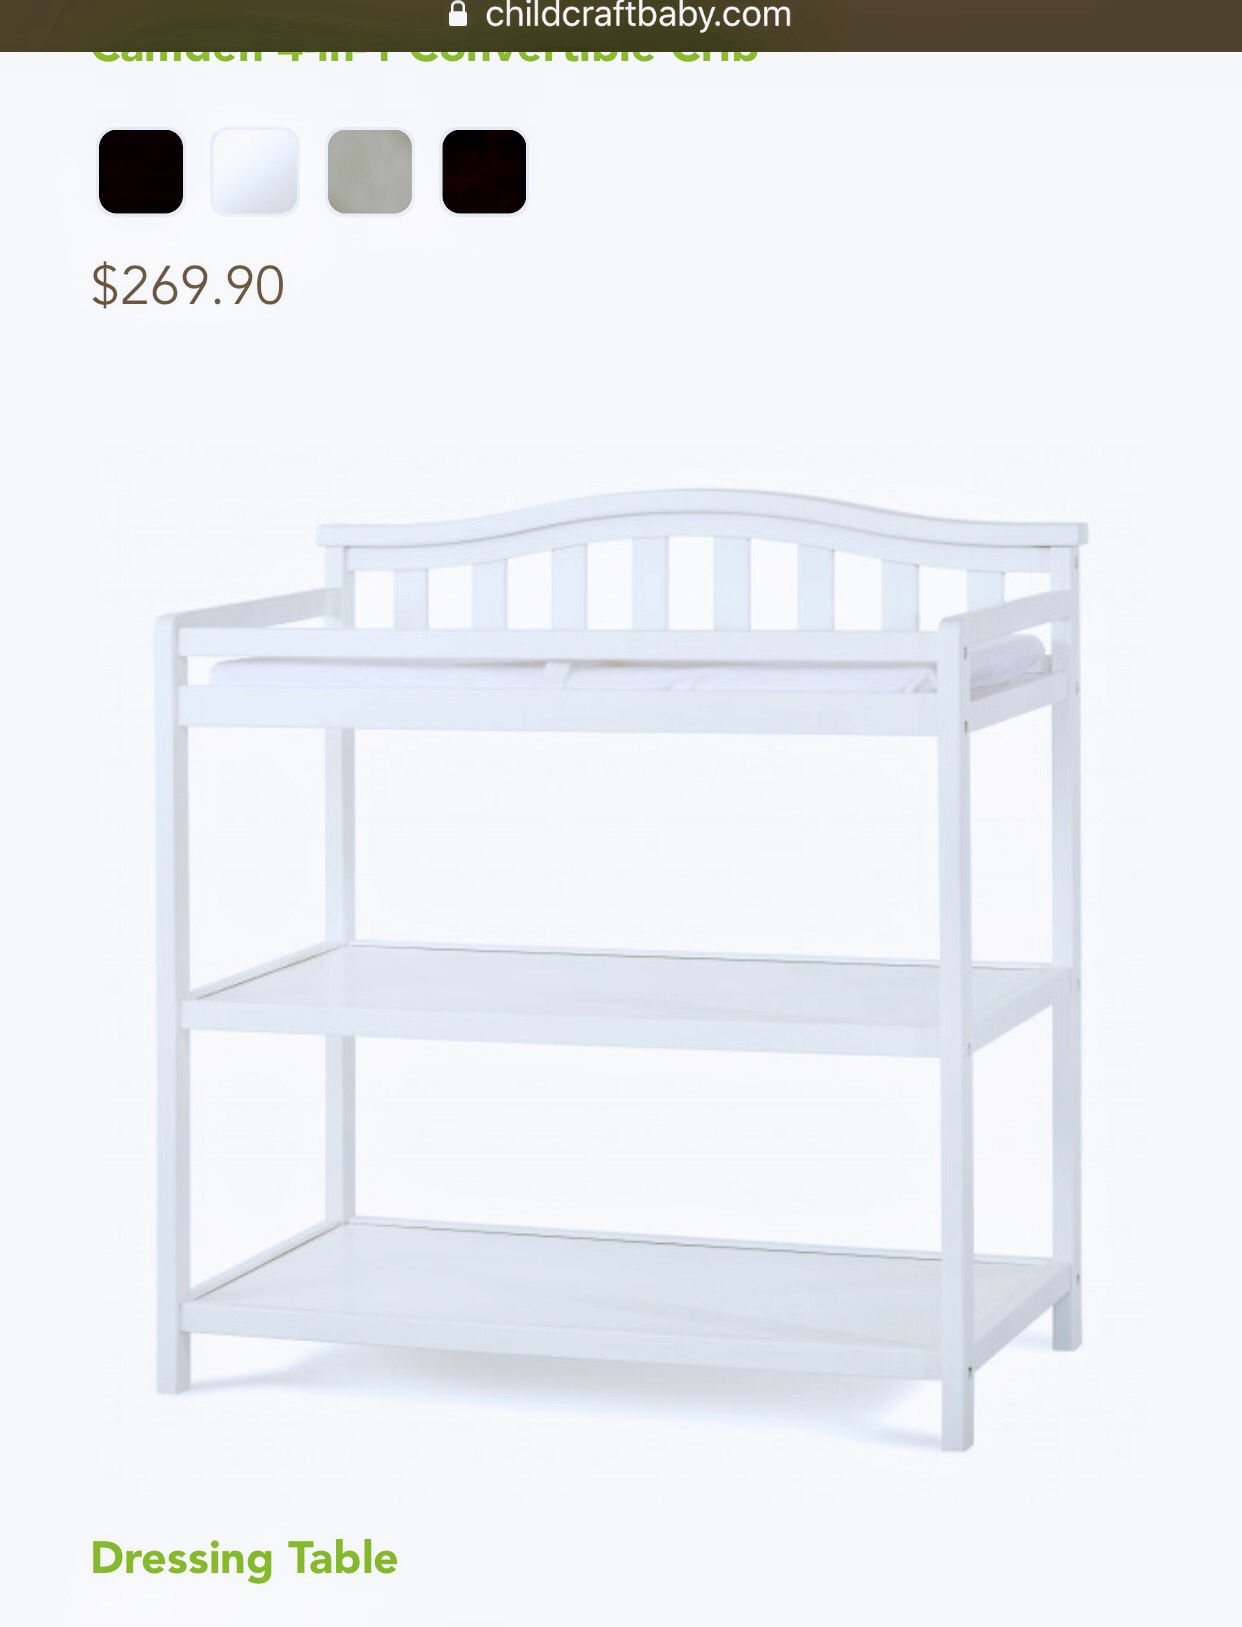 Brand new never opened before dressing table and changing table cost $269 asking for $60 thanks